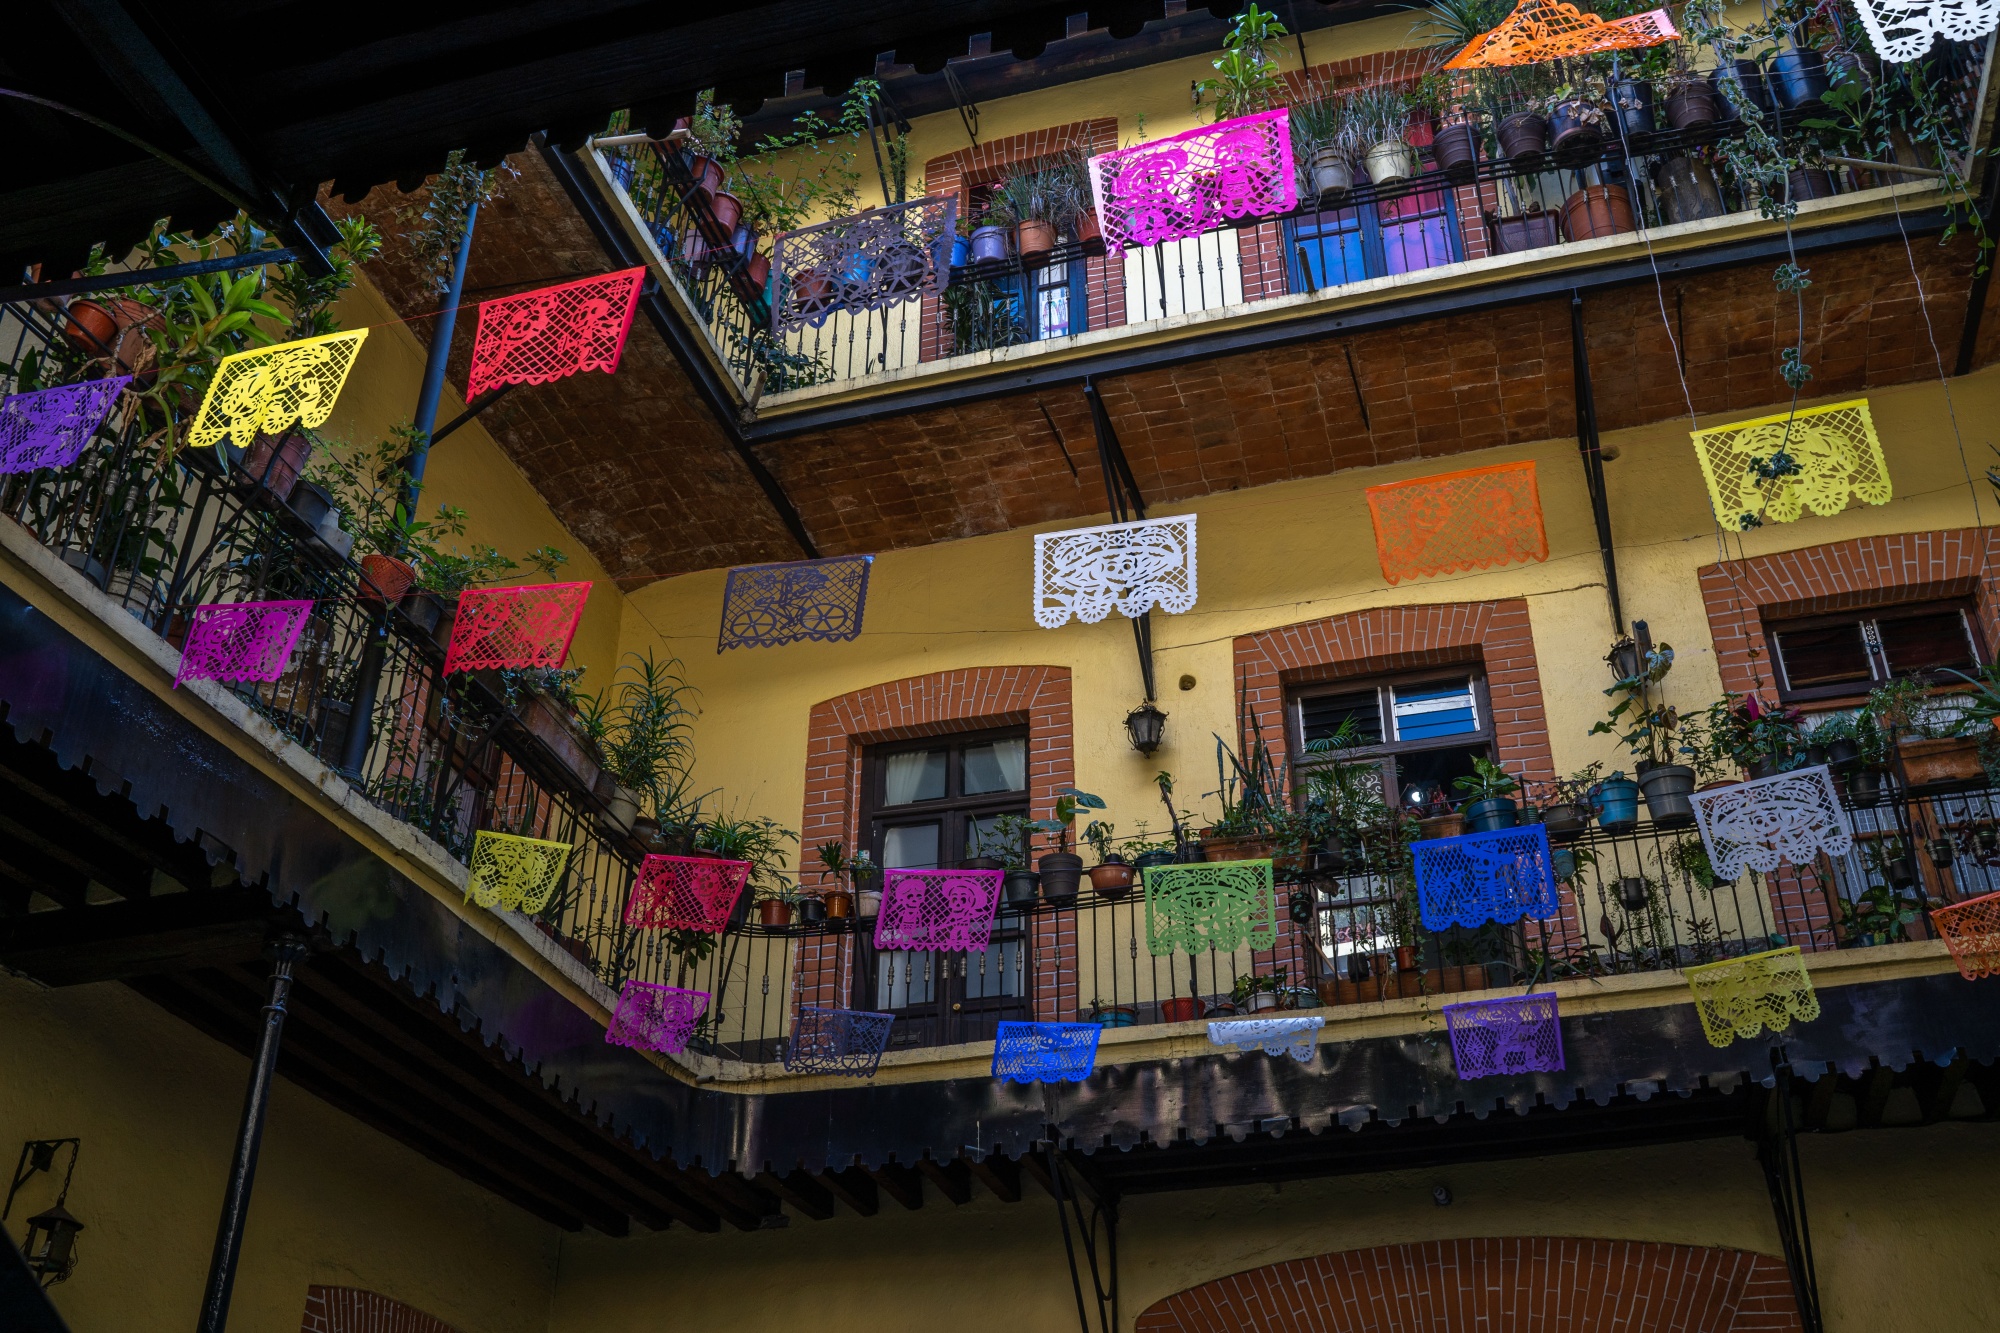 The courtyard of a recently restored Mexico City vecindad,&nbsp;decorated for the annual Day of the Dead celebrations.